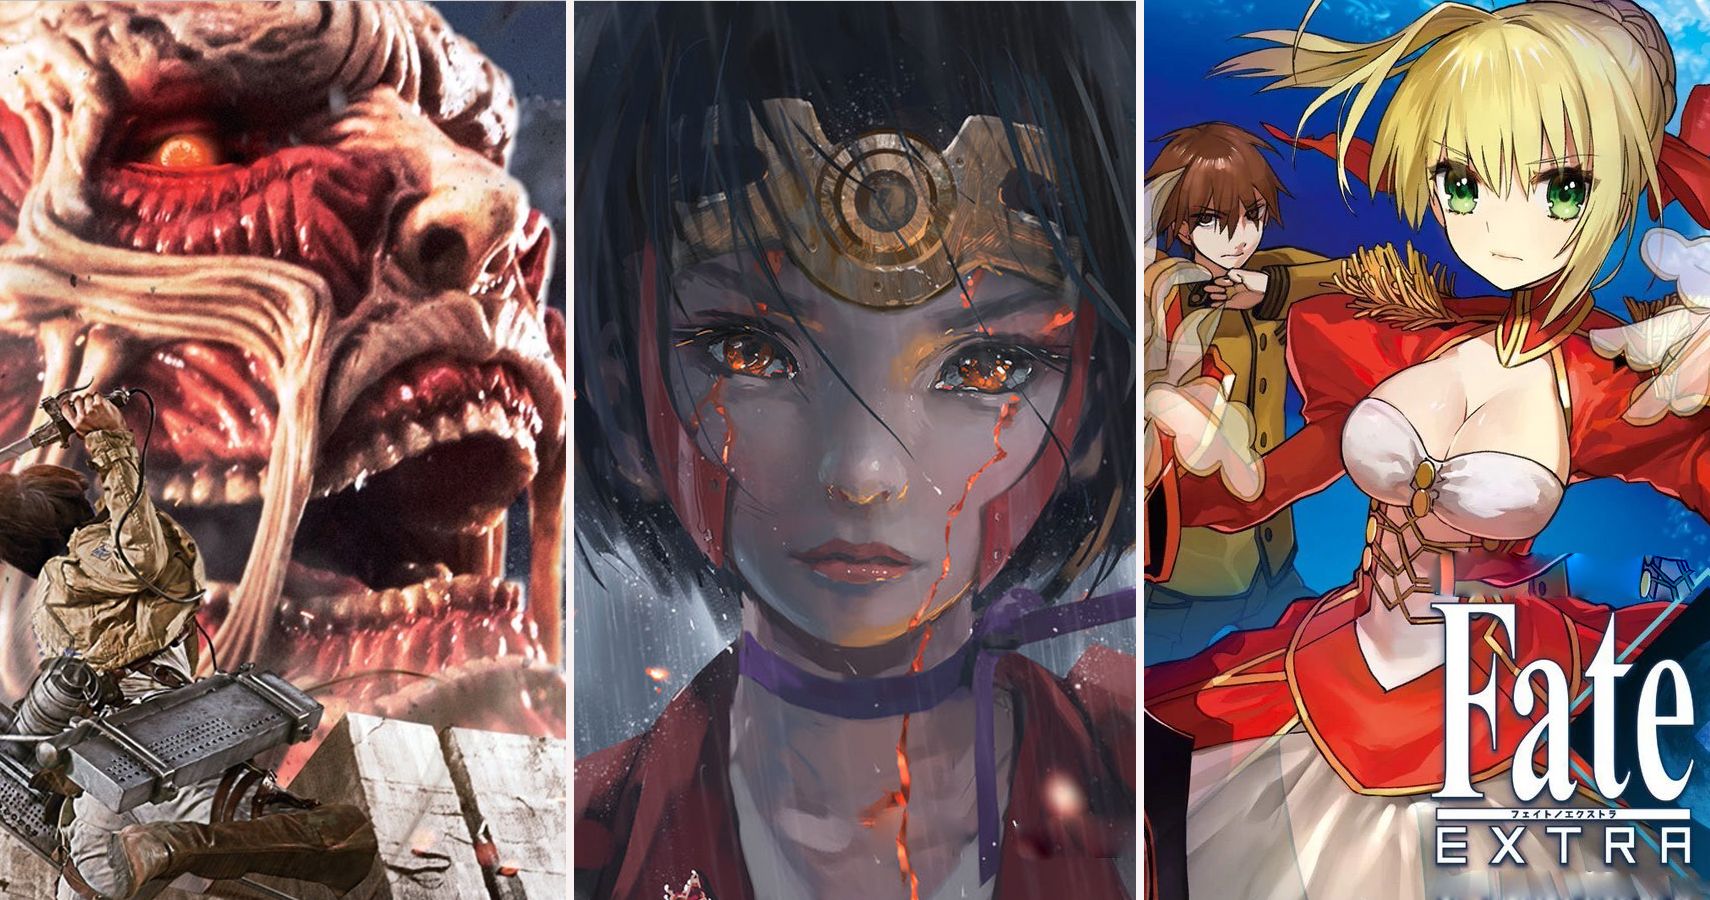 16 Best Anime TV Shows And Movies In 2018 - GameSpot